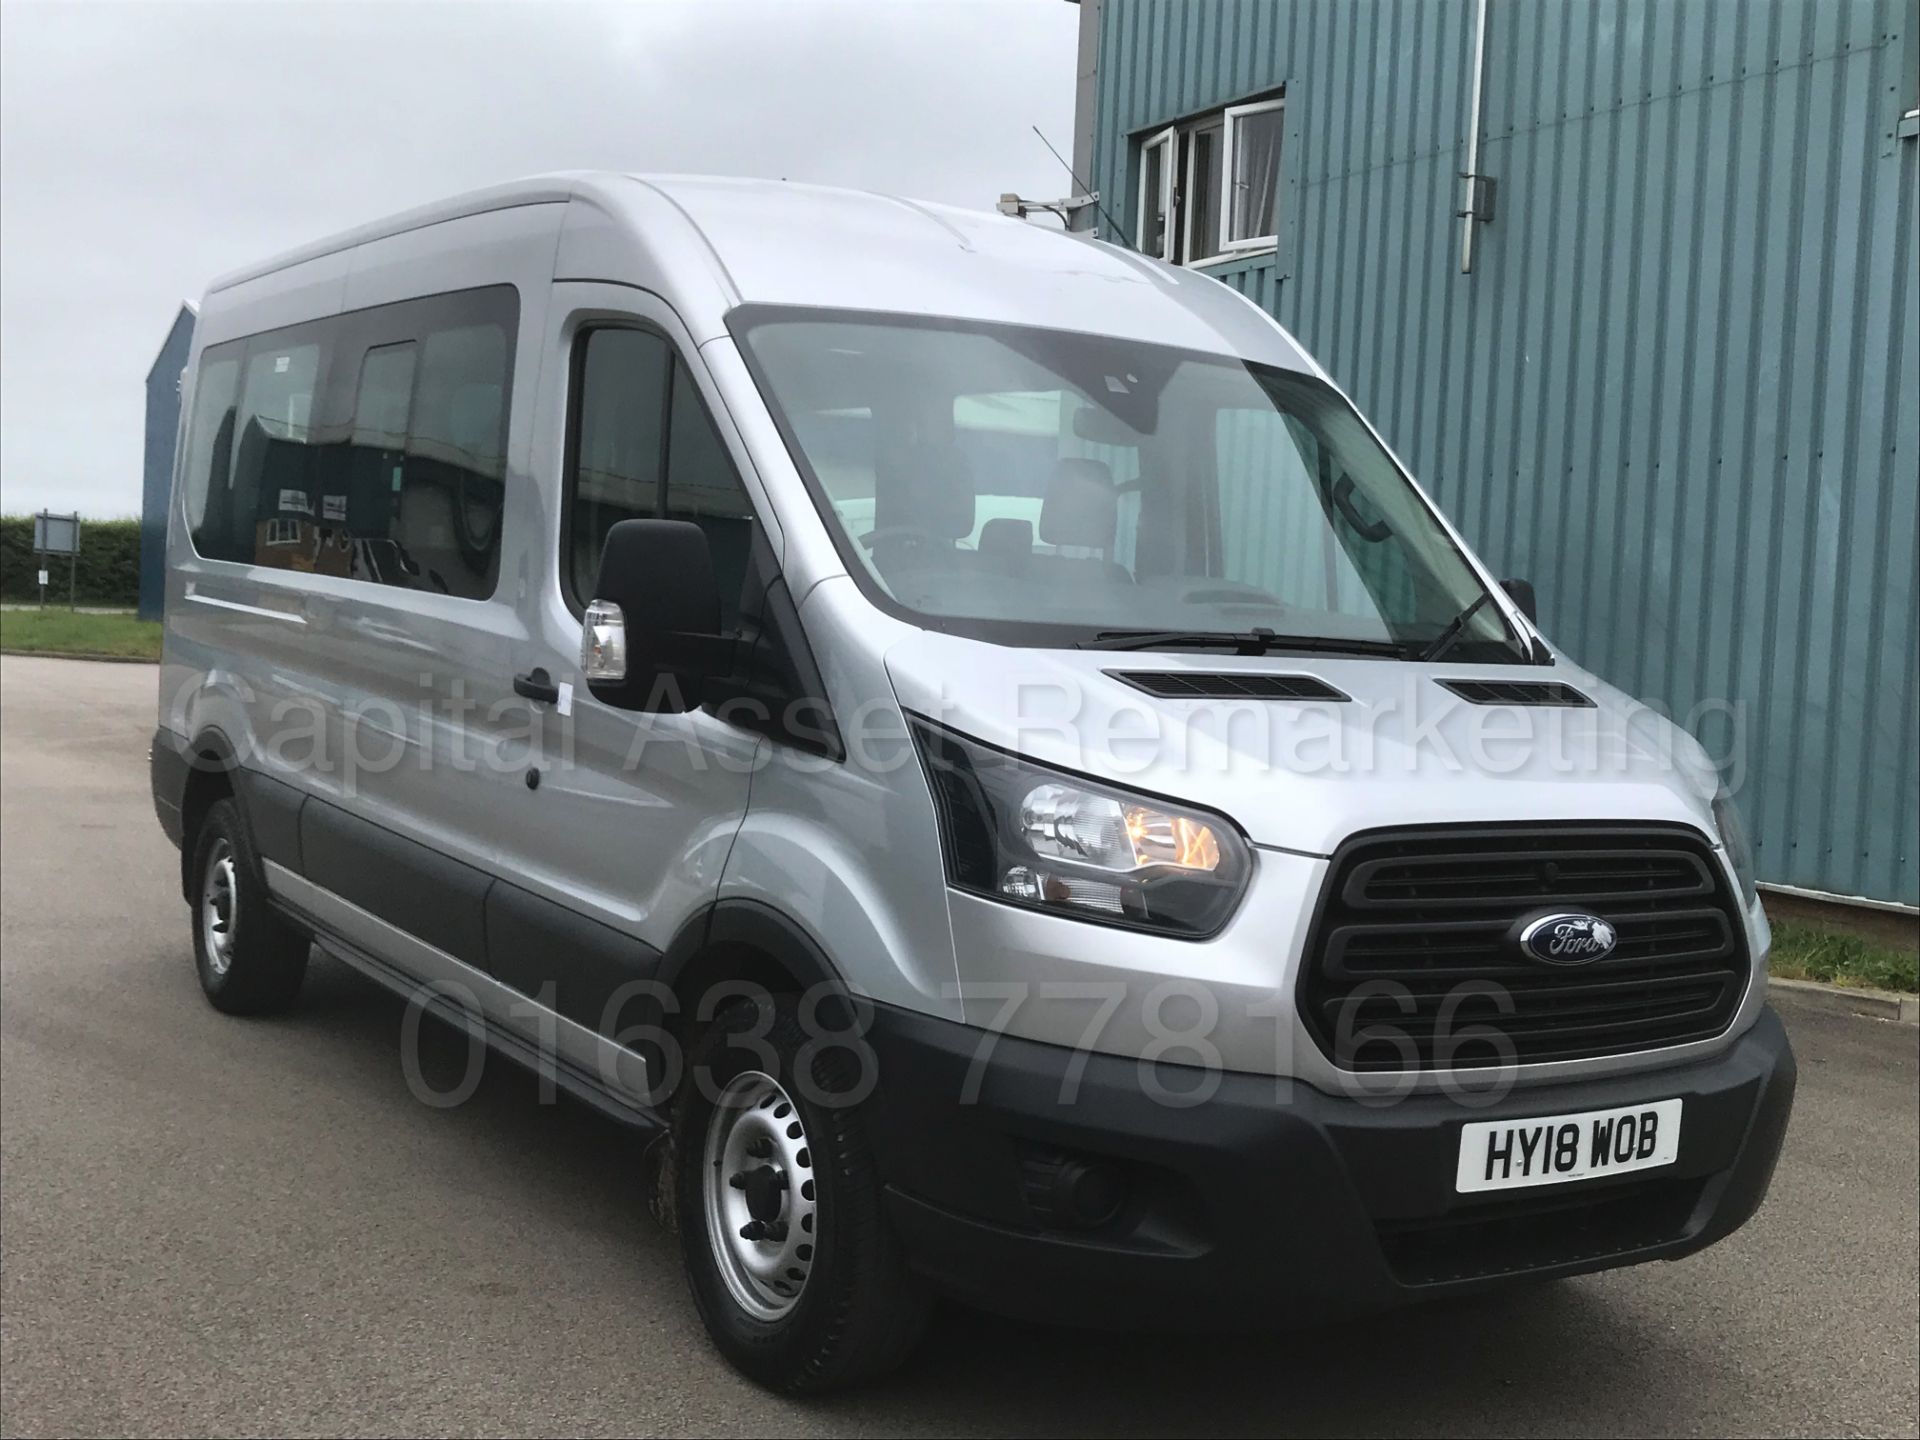 (On Sale) FORD TRANSIT LWB '15 SEATER MINI-BUS' (2018) '2.2 TDCI -125 BHP- 6 SPEED' 130 MILES ONLY ! - Image 2 of 50